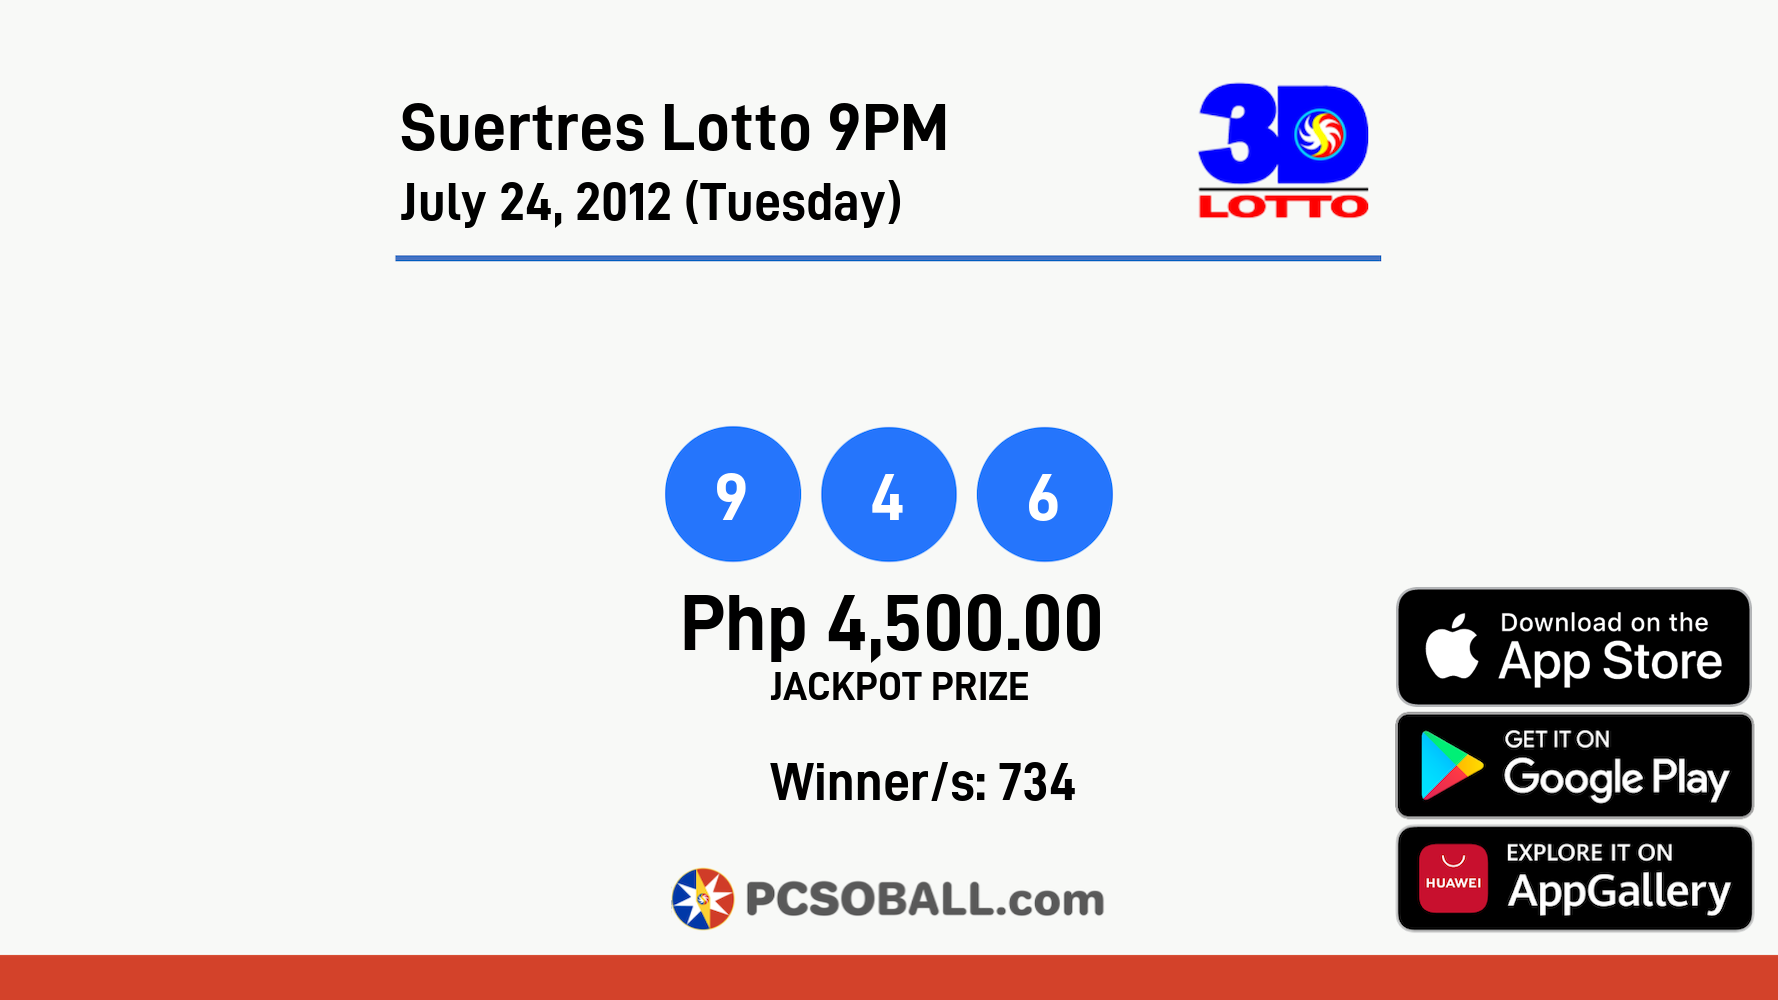 Suertres Lotto 9PM July 24, 2012 (Tuesday) Result